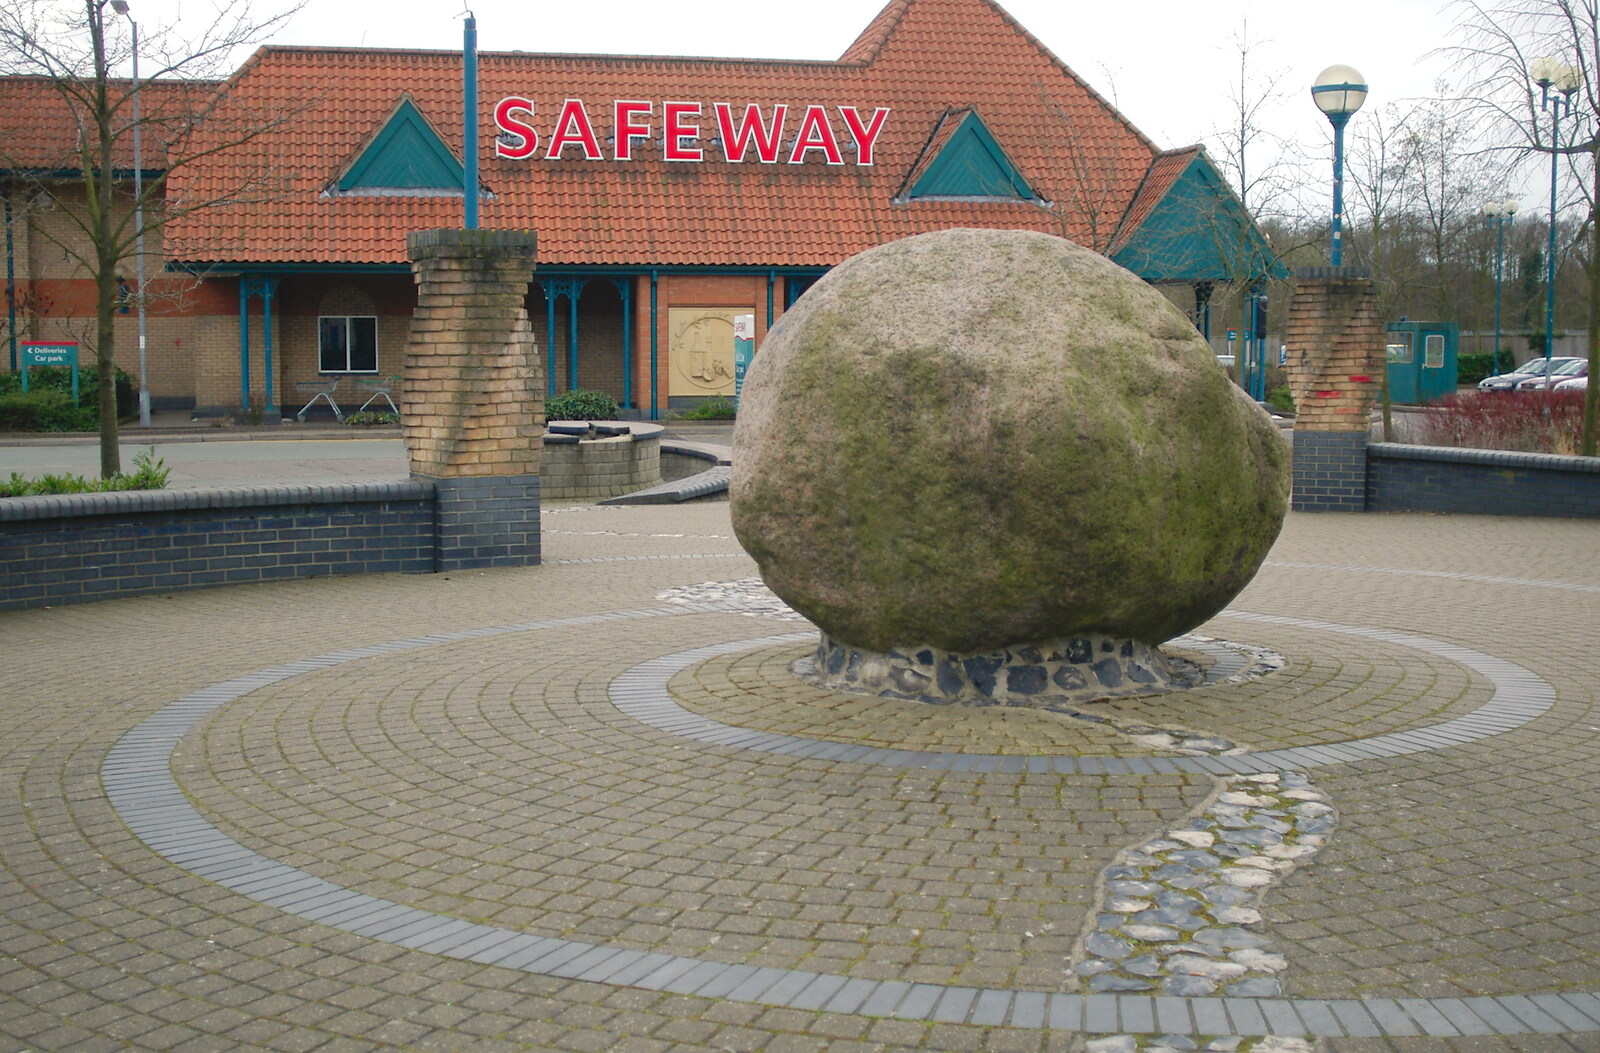 The Safeway granite rock - home of Gort from The SCC Social Club and the  Demolition of Diss Publishing, Ipswich and Diss - 2nd April 2005